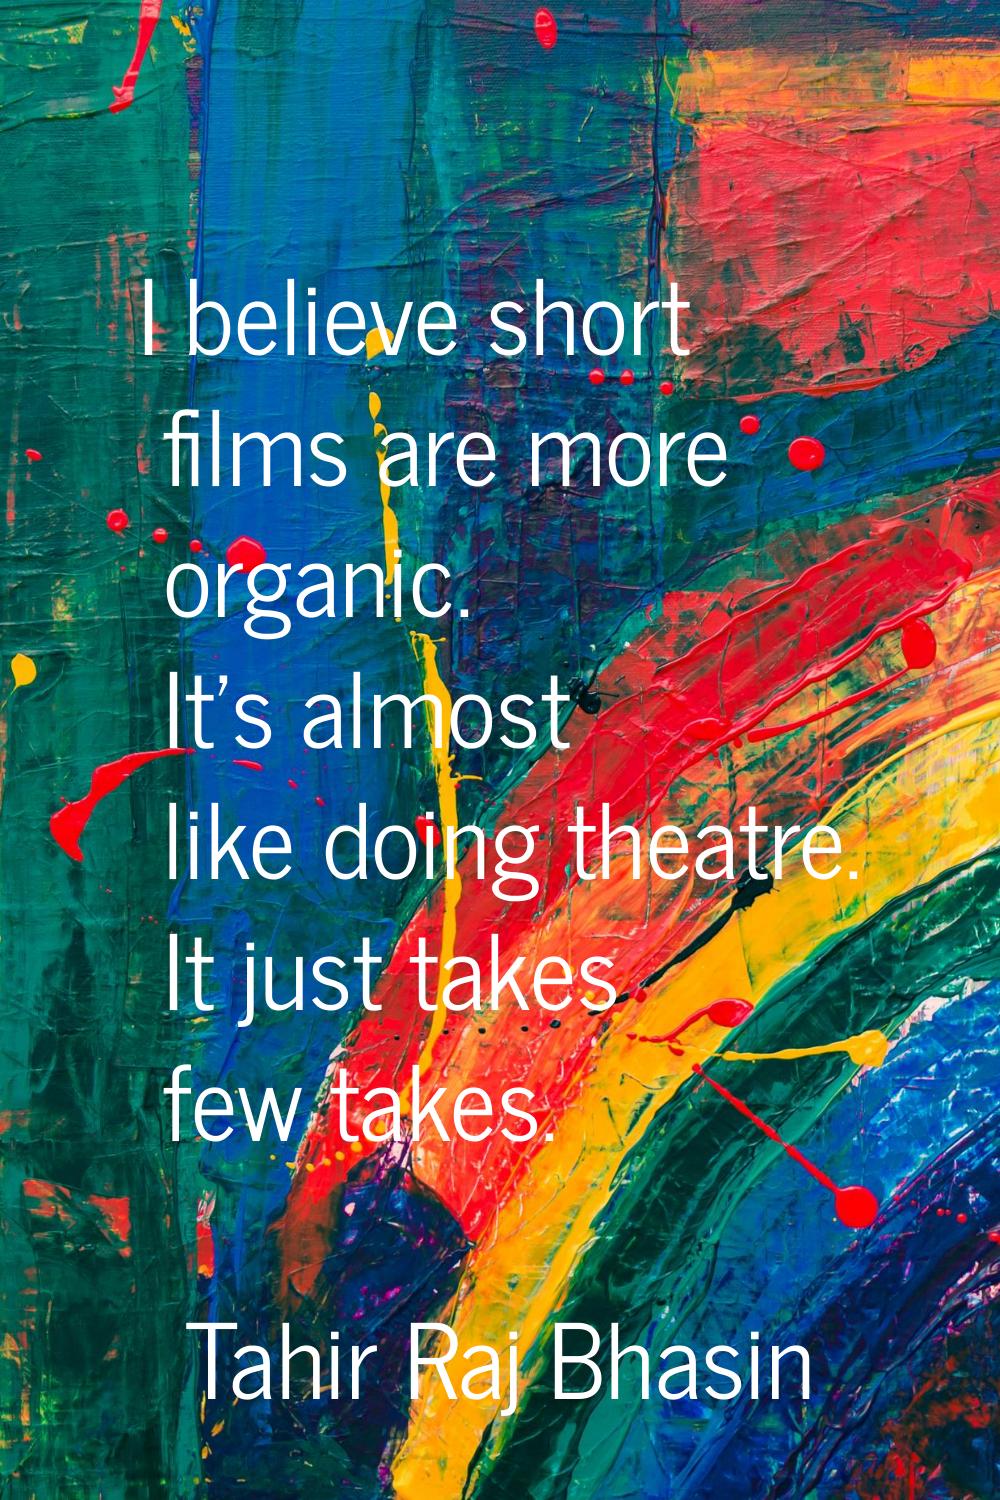 I believe short films are more organic. It's almost like doing theatre. It just takes few takes.